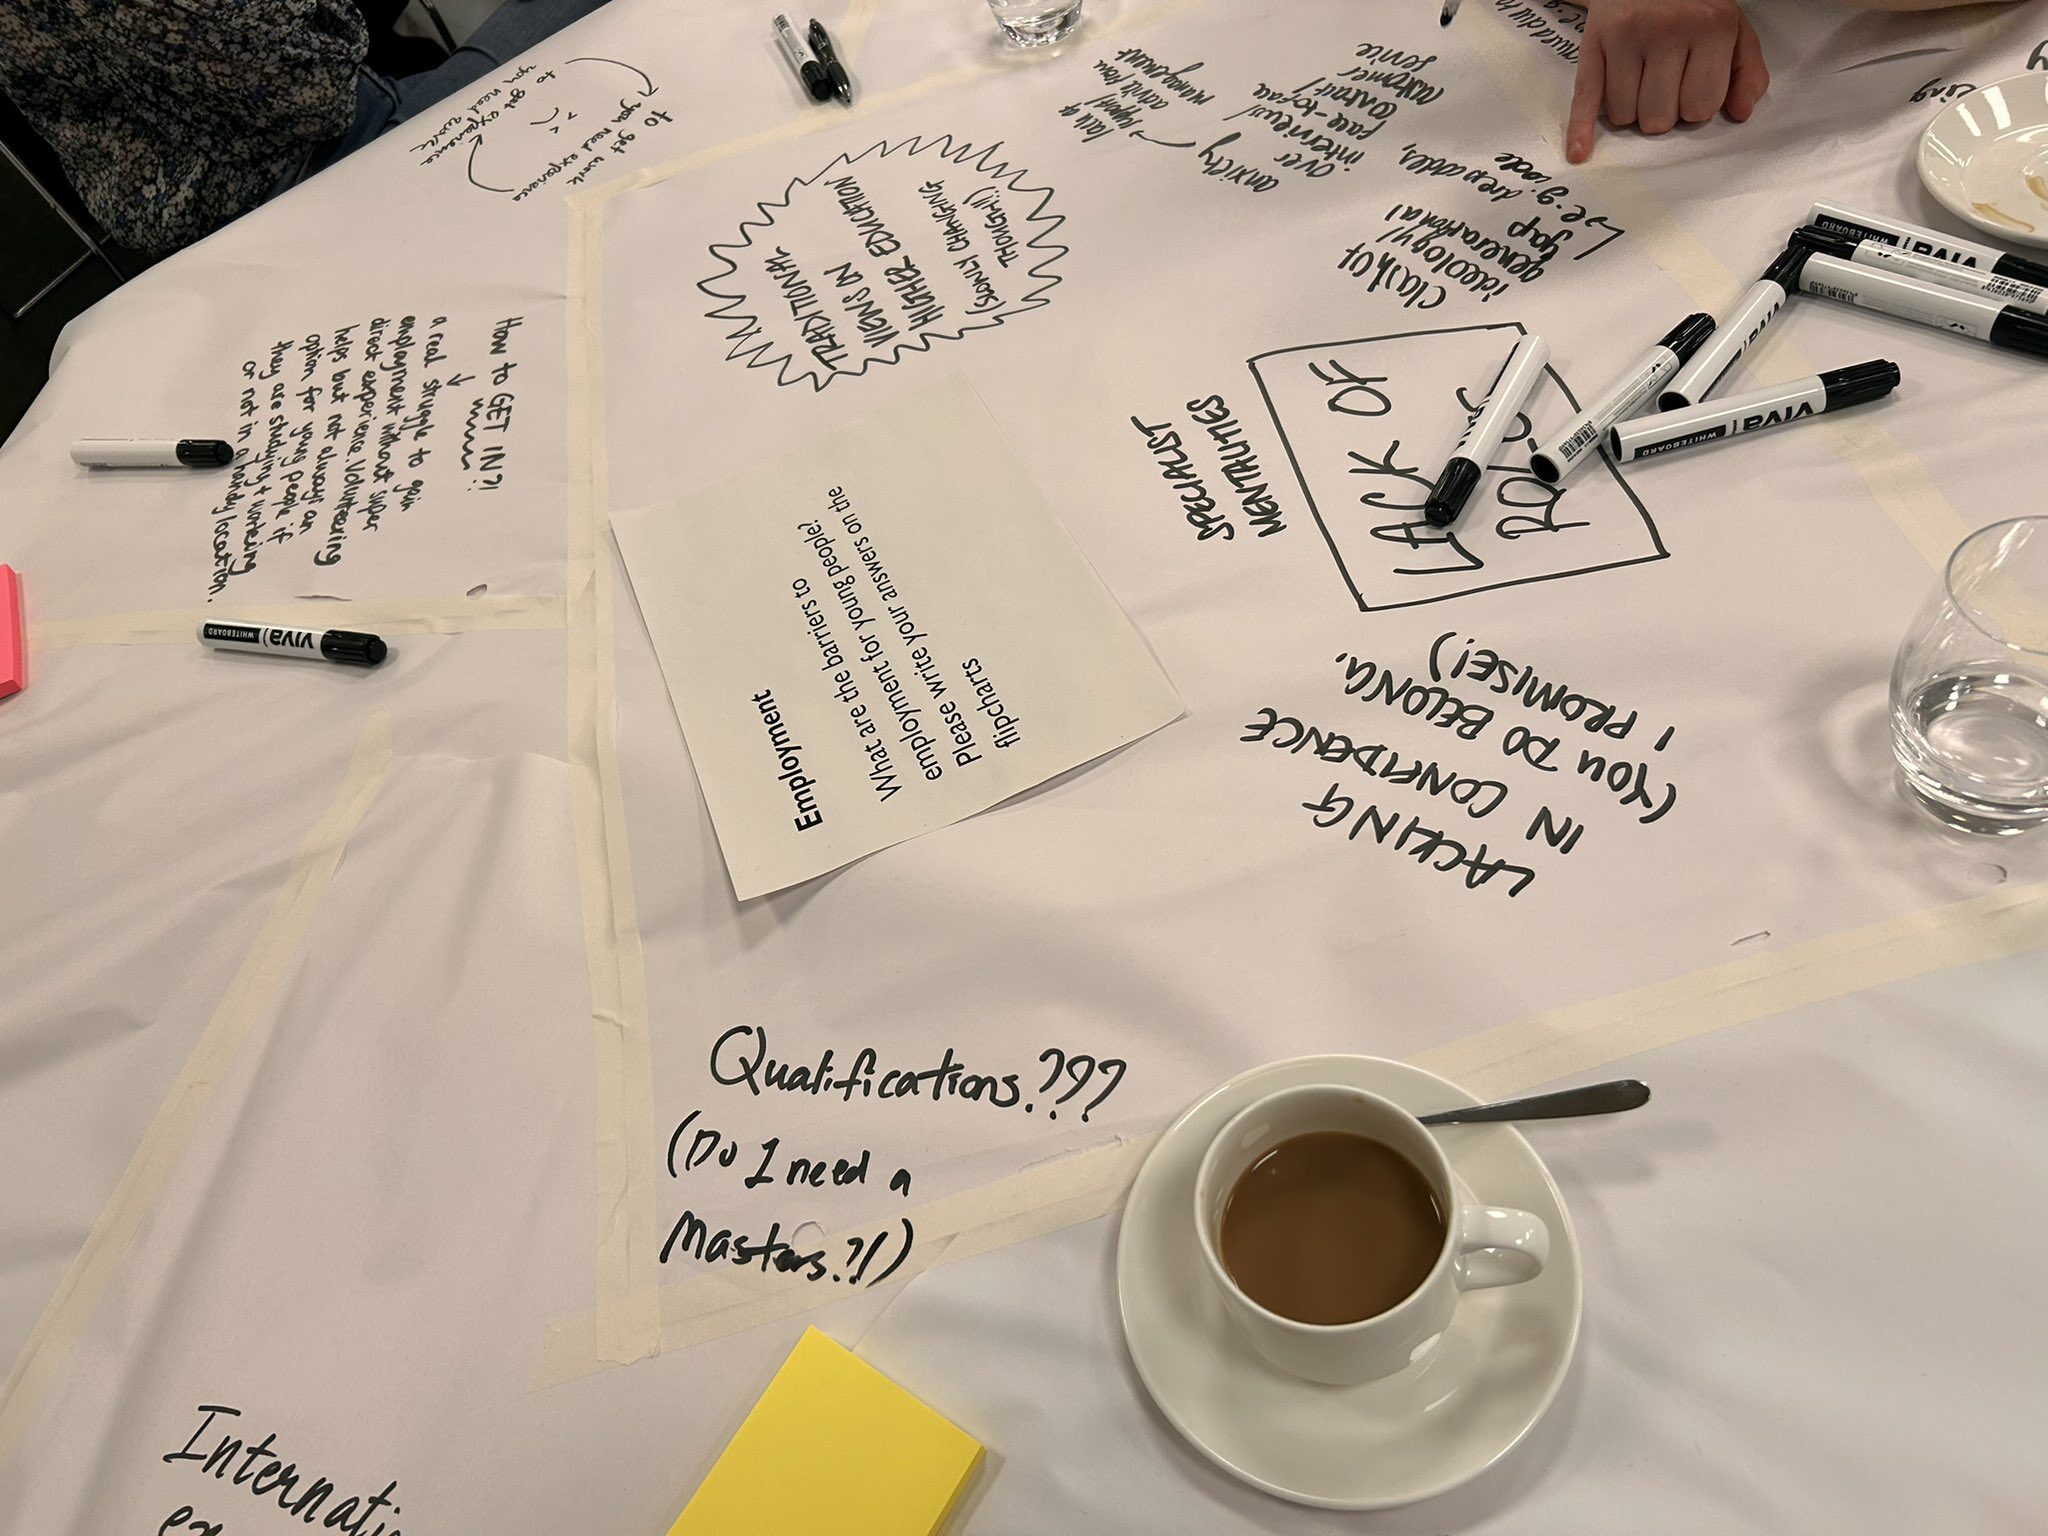 A table at the Museum Youth Summit covered in paper with young people's written notes across them. You can also see a cup of coffee and piles of pens.